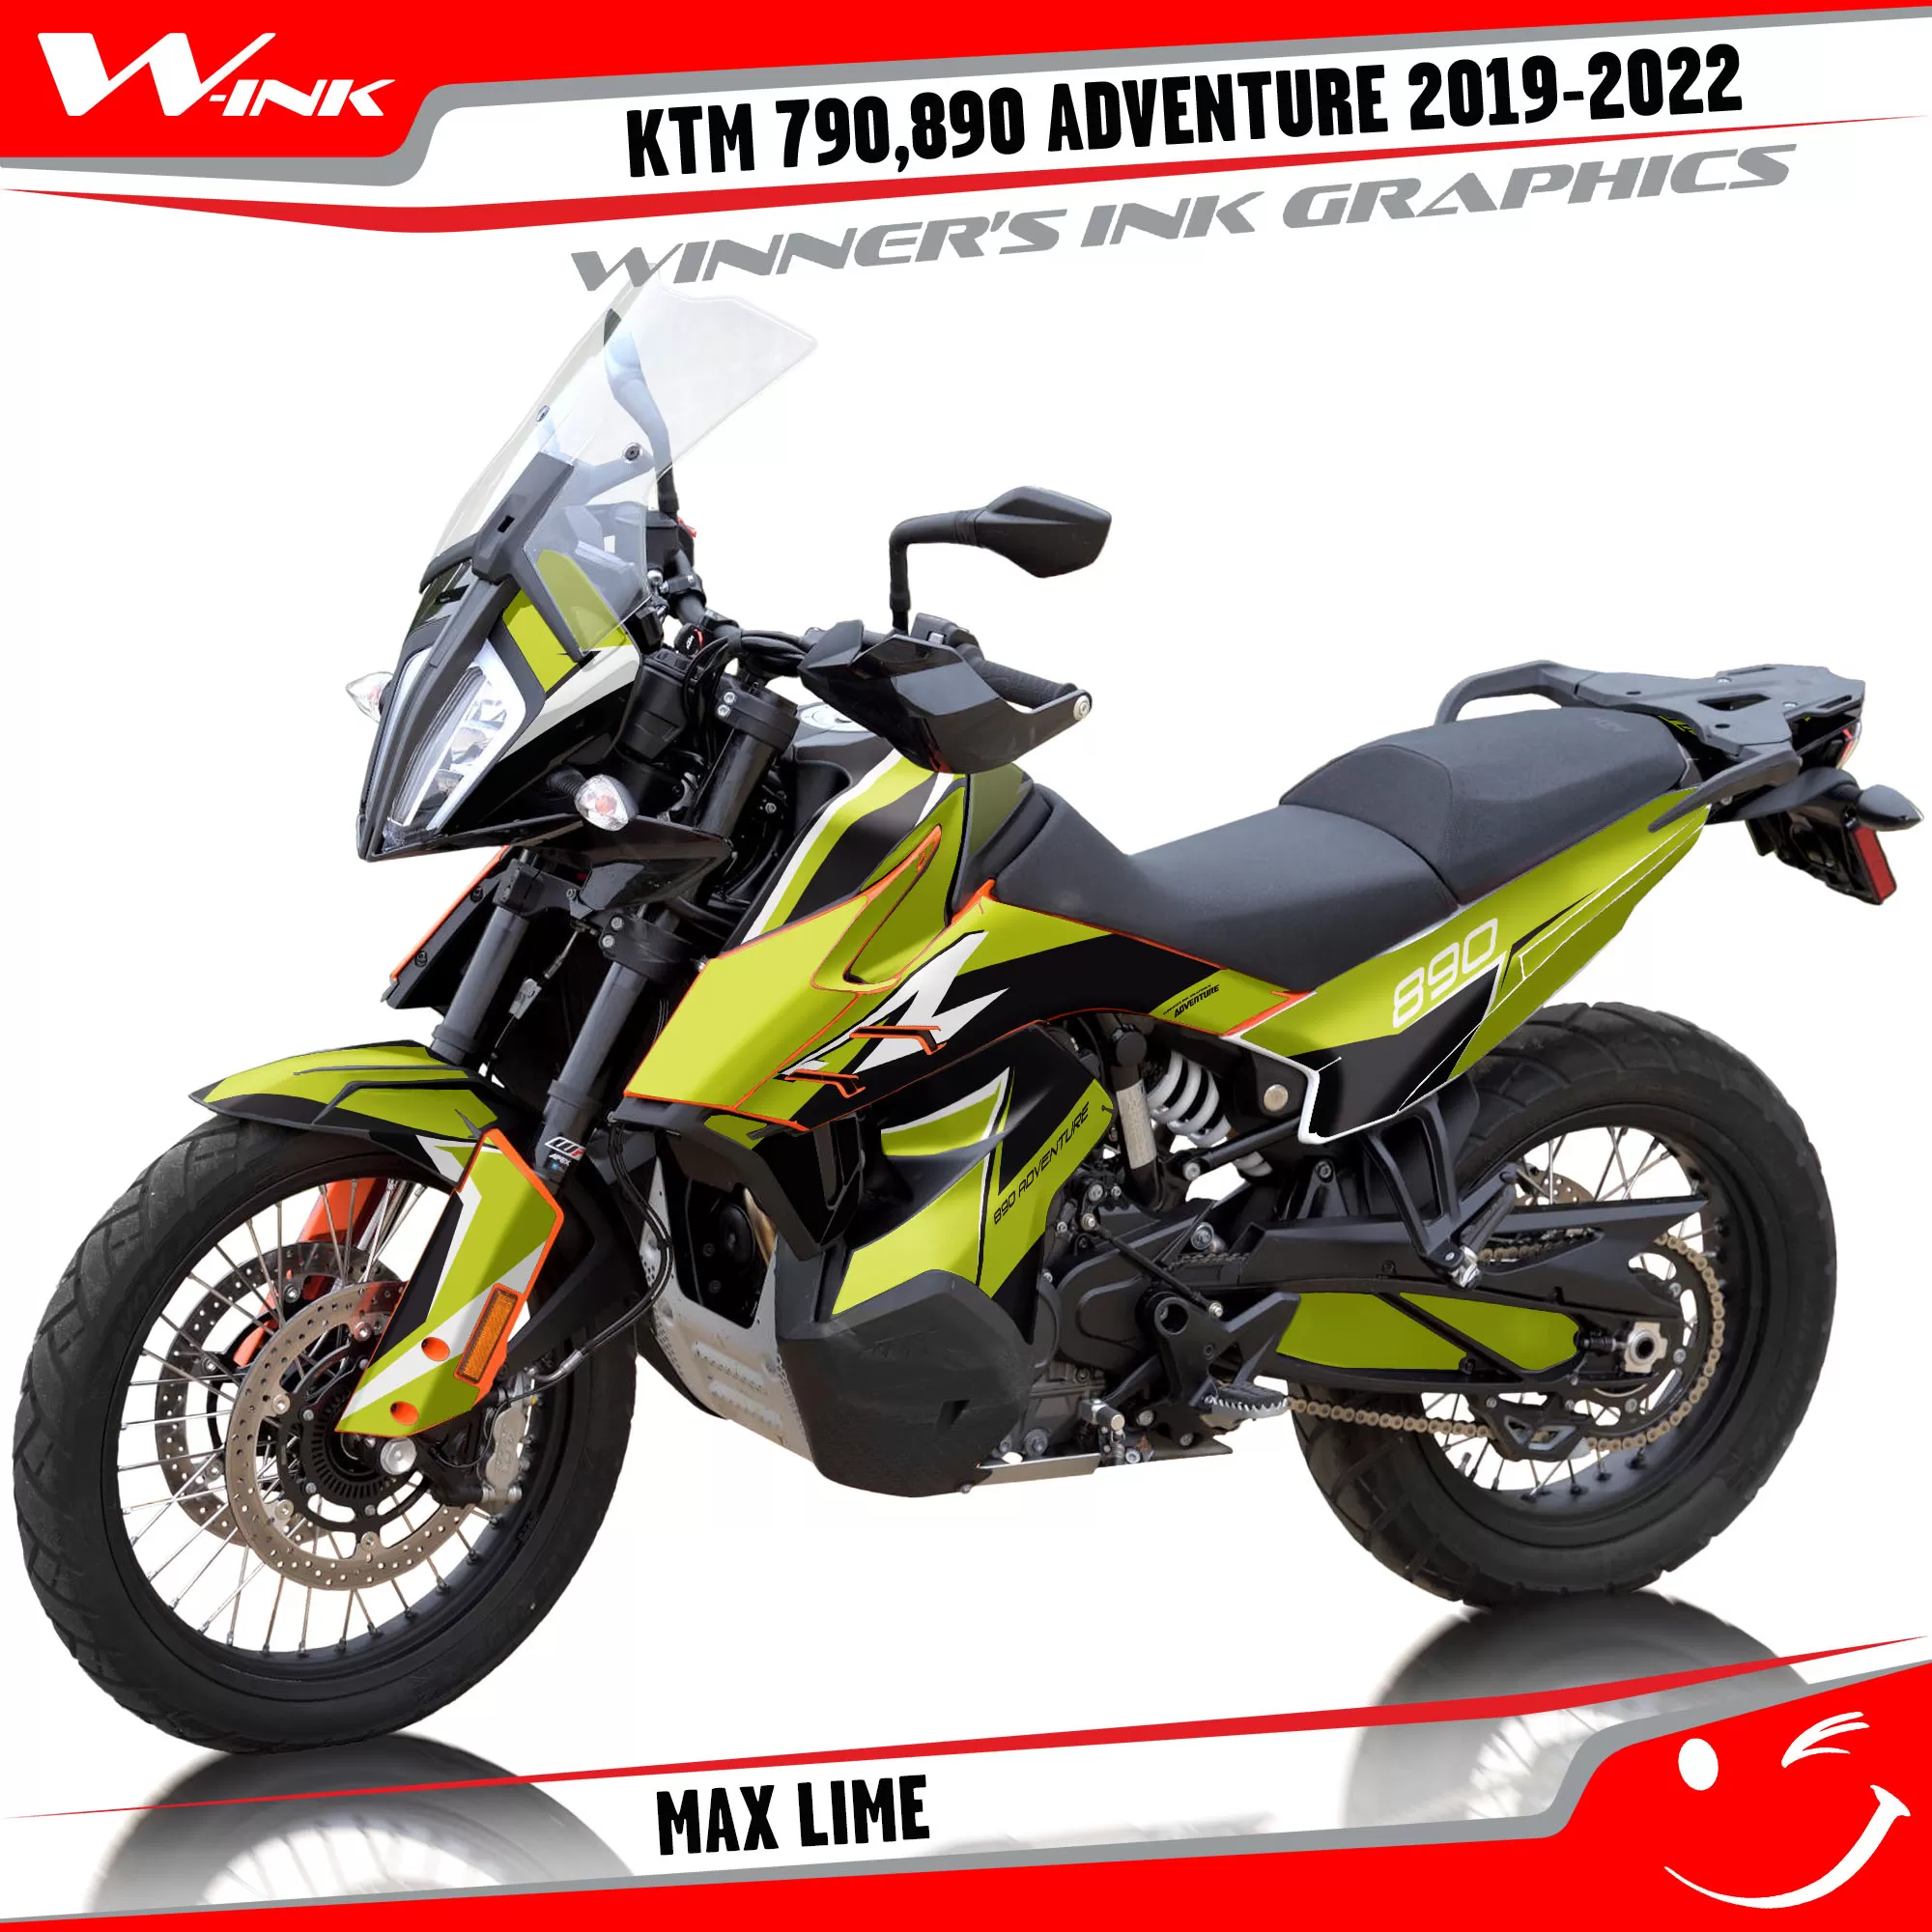 Adventure-790-890-2019-2020-2021-2022-graphics-kit-and-decals-with-designs-Max-Lime